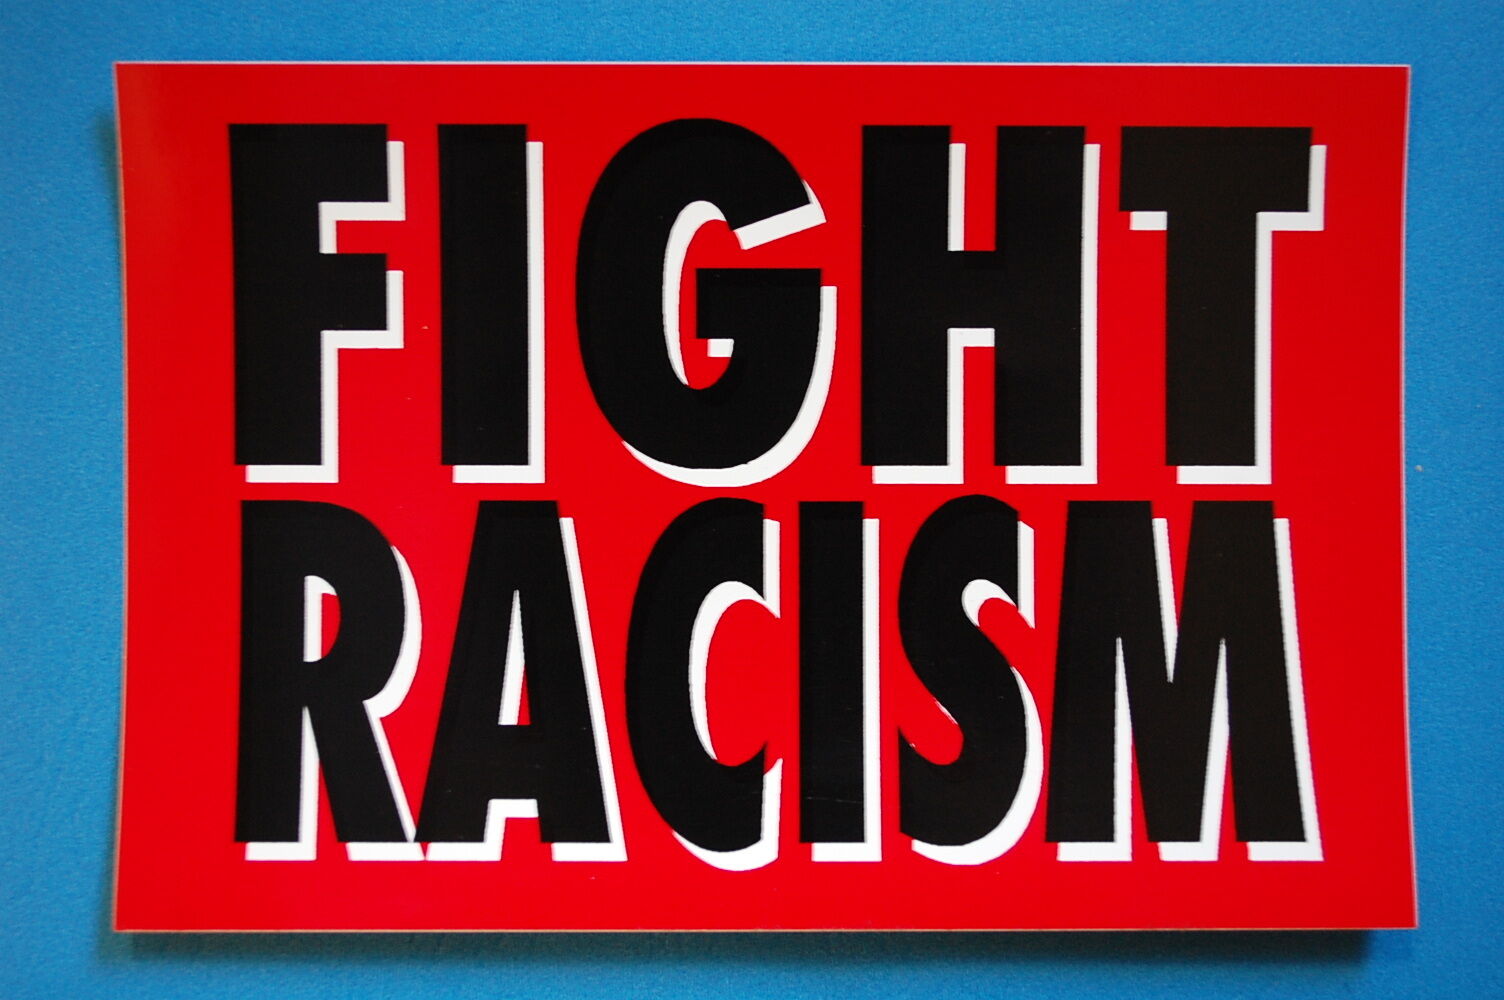 Anti Racism FIGHT RACISM Rock Sticker Decal (S186)